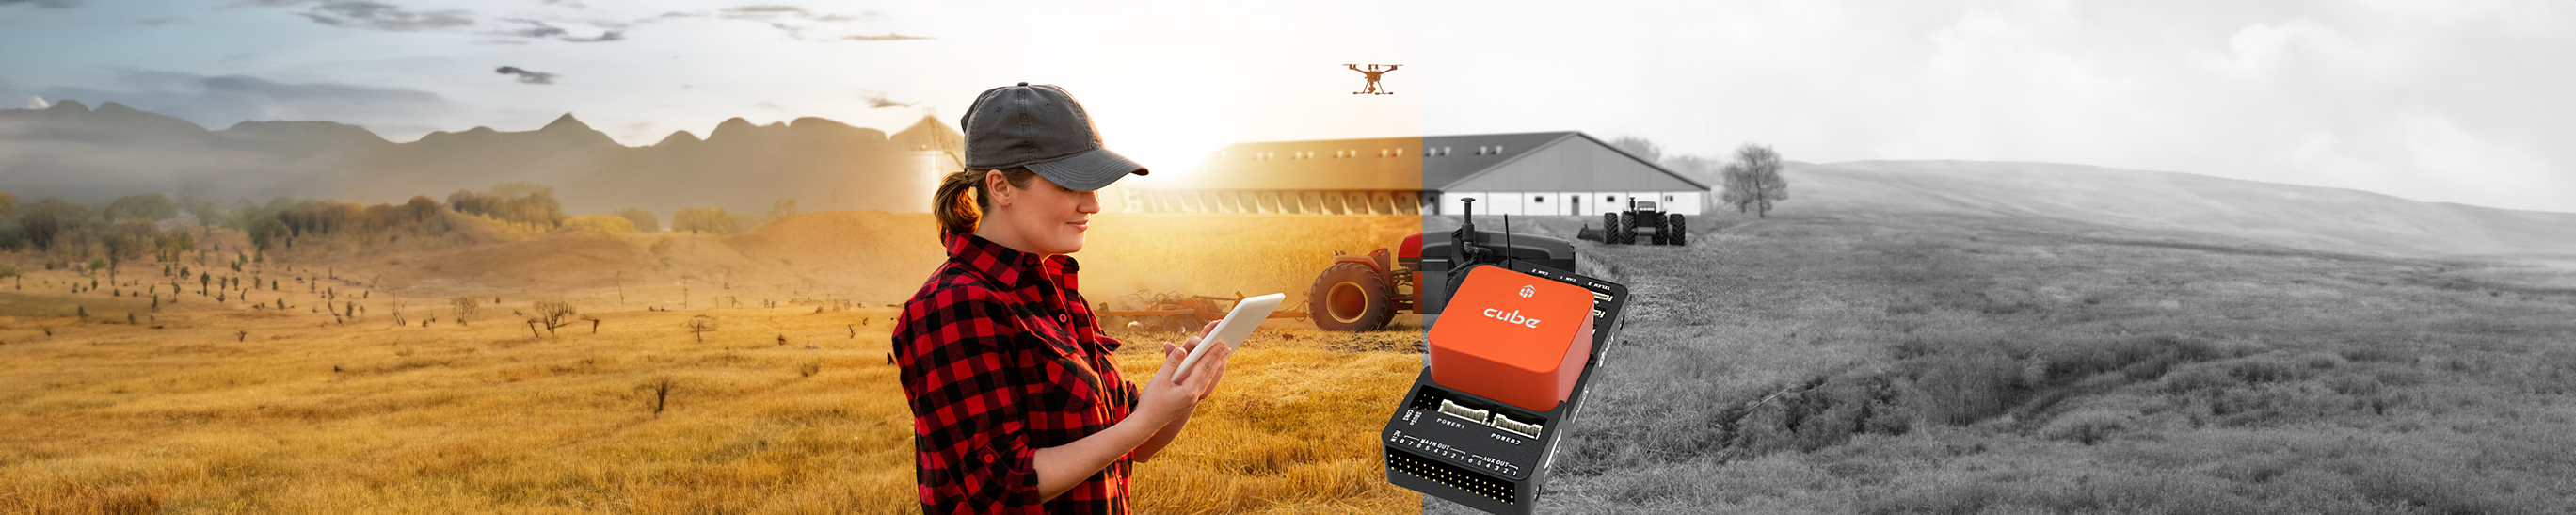 A CubePilot Orange Standard Set device is overlaid on the right side of the image, emphasizing advanced agricultural technology. - Aeroboticshop.com